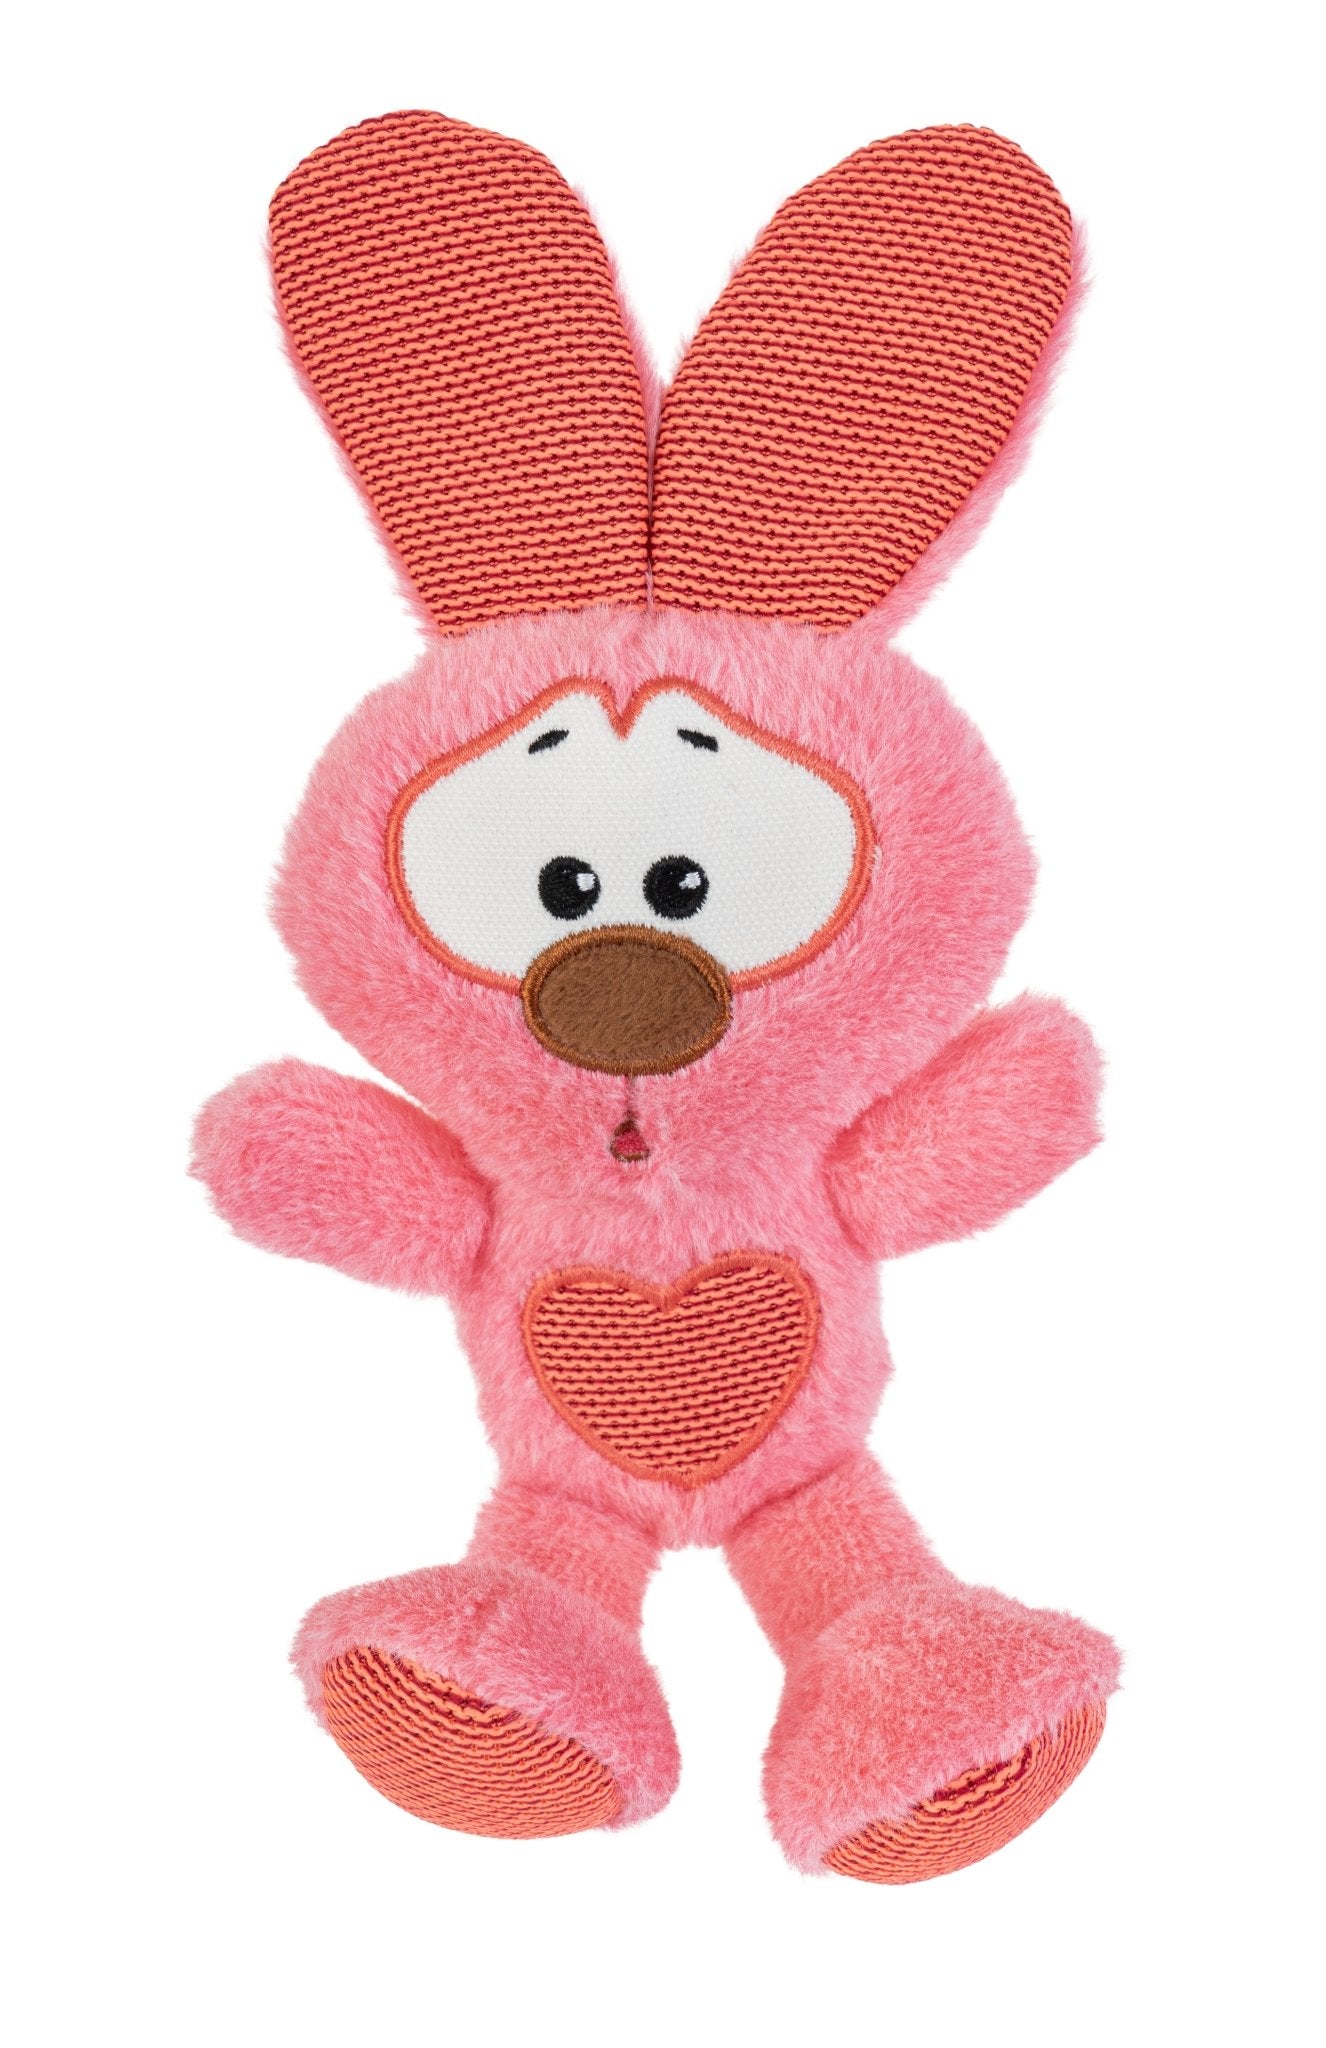 Yours Droolly Puppy Snuggle Rabbit - Woonona Petfood & Produce